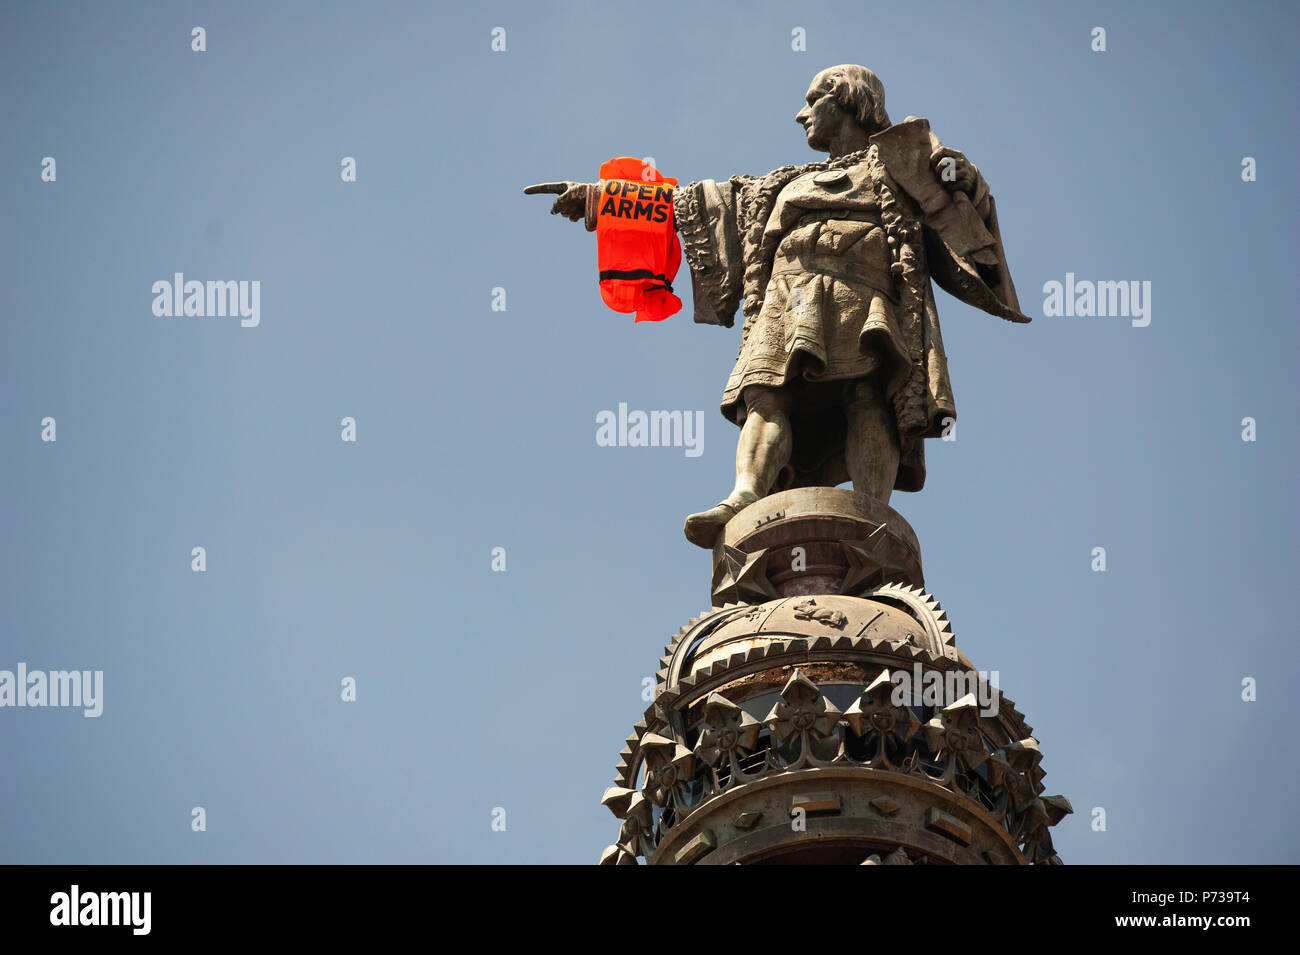 Barcelona. 04th July, 2018.  Activists of the ONG Proactiva Open Arms, have placed a life preserver with the words "Open Arms" in monument Christopher Columbus tower. The activists have carried out this action for Christopher Columbus to call attention to the loss of lives of migrants and refugees in the Mediterranean Sea. Credit: Charlie Perez/Alamy Live News Stock Photo